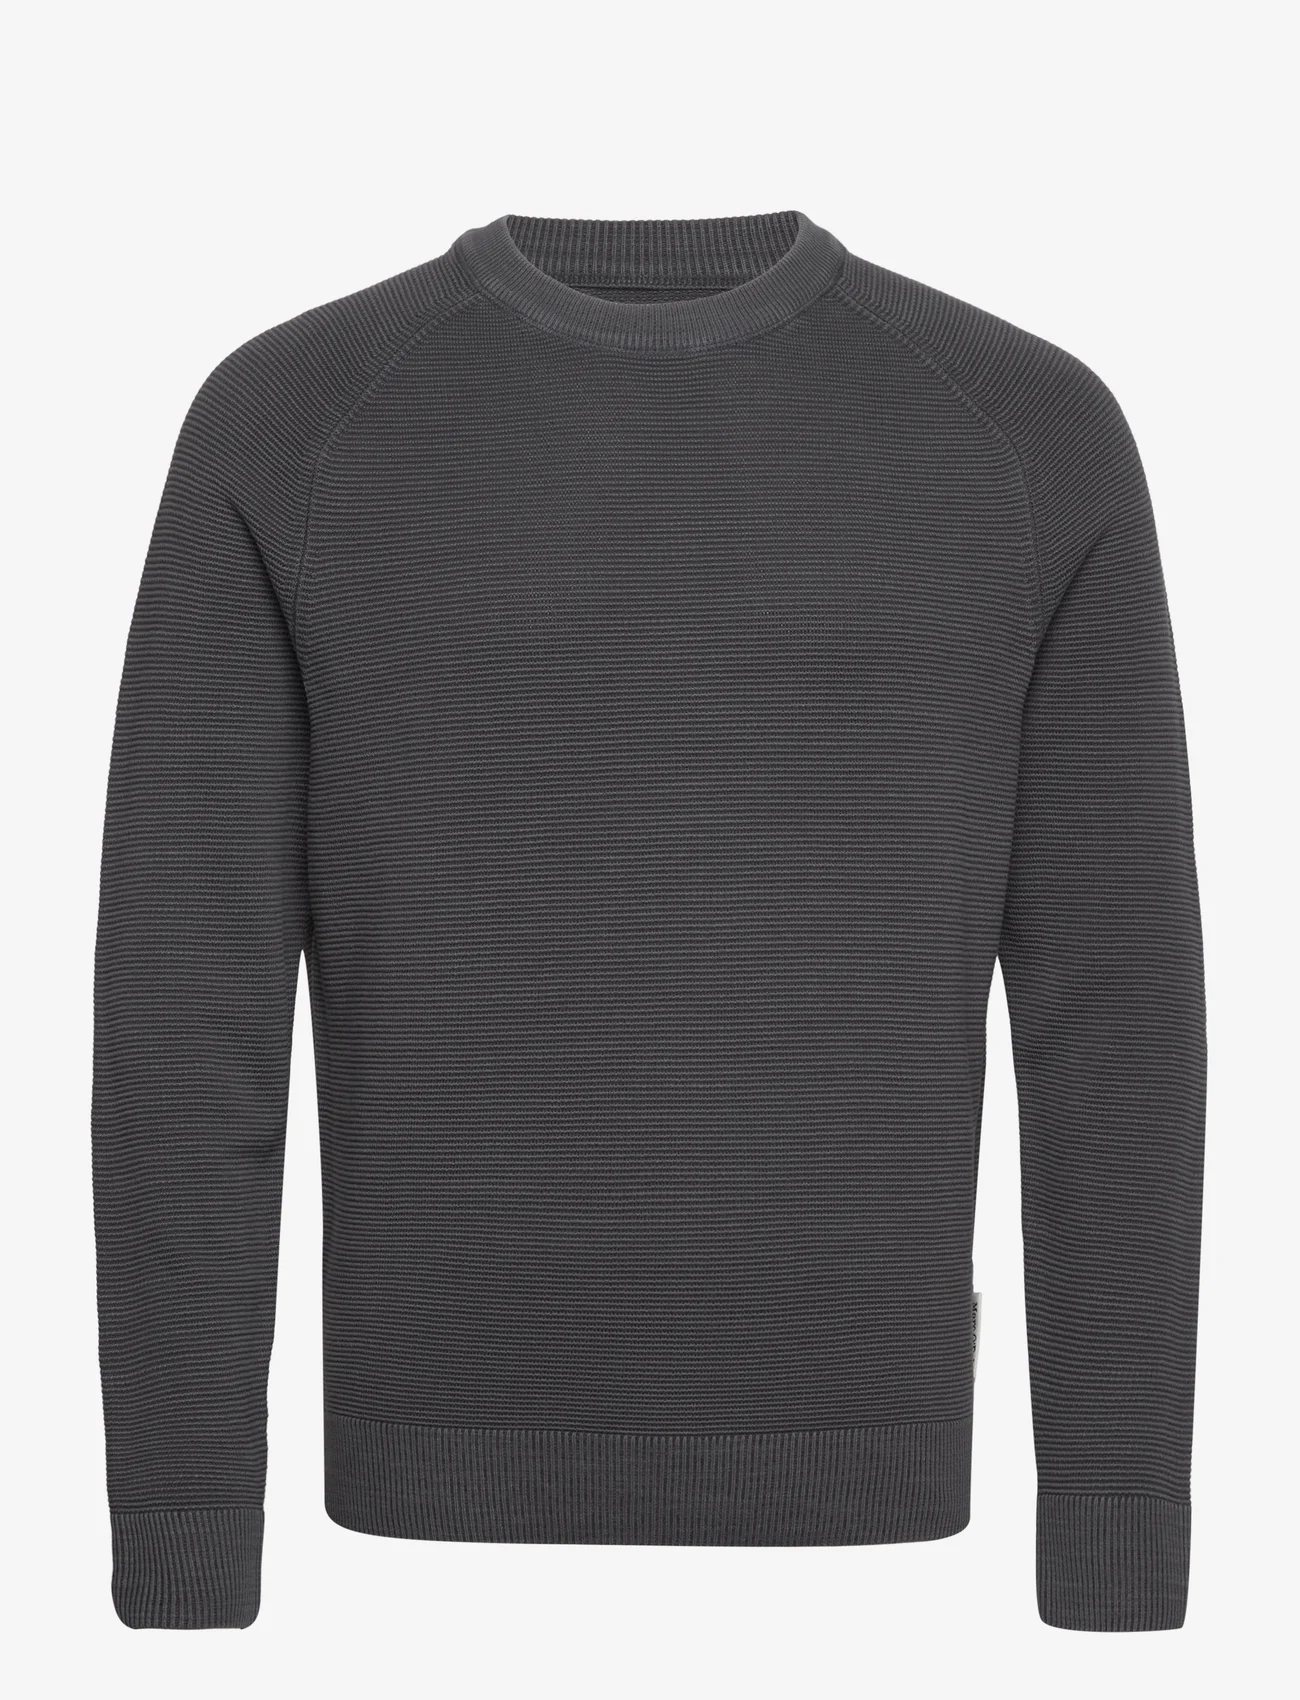 Marc O'Polo - PULLOVERS LONG SLEEVE - knitted round necks - gray pin - 0